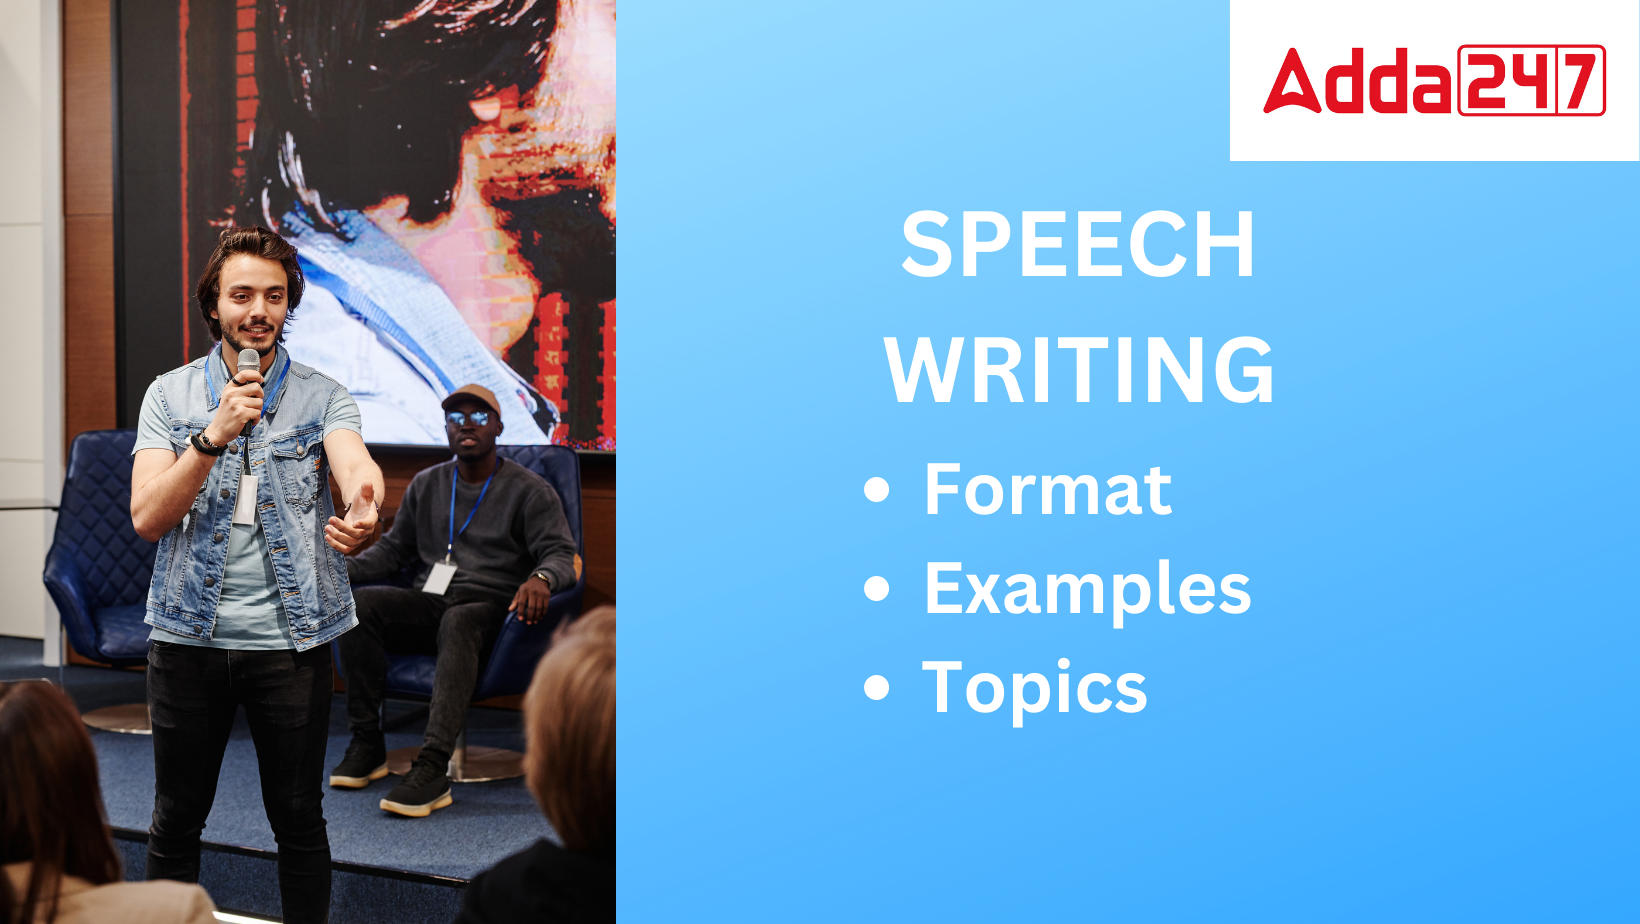 Writing Speeches to Inspire Change: Teaching Writing With a Social